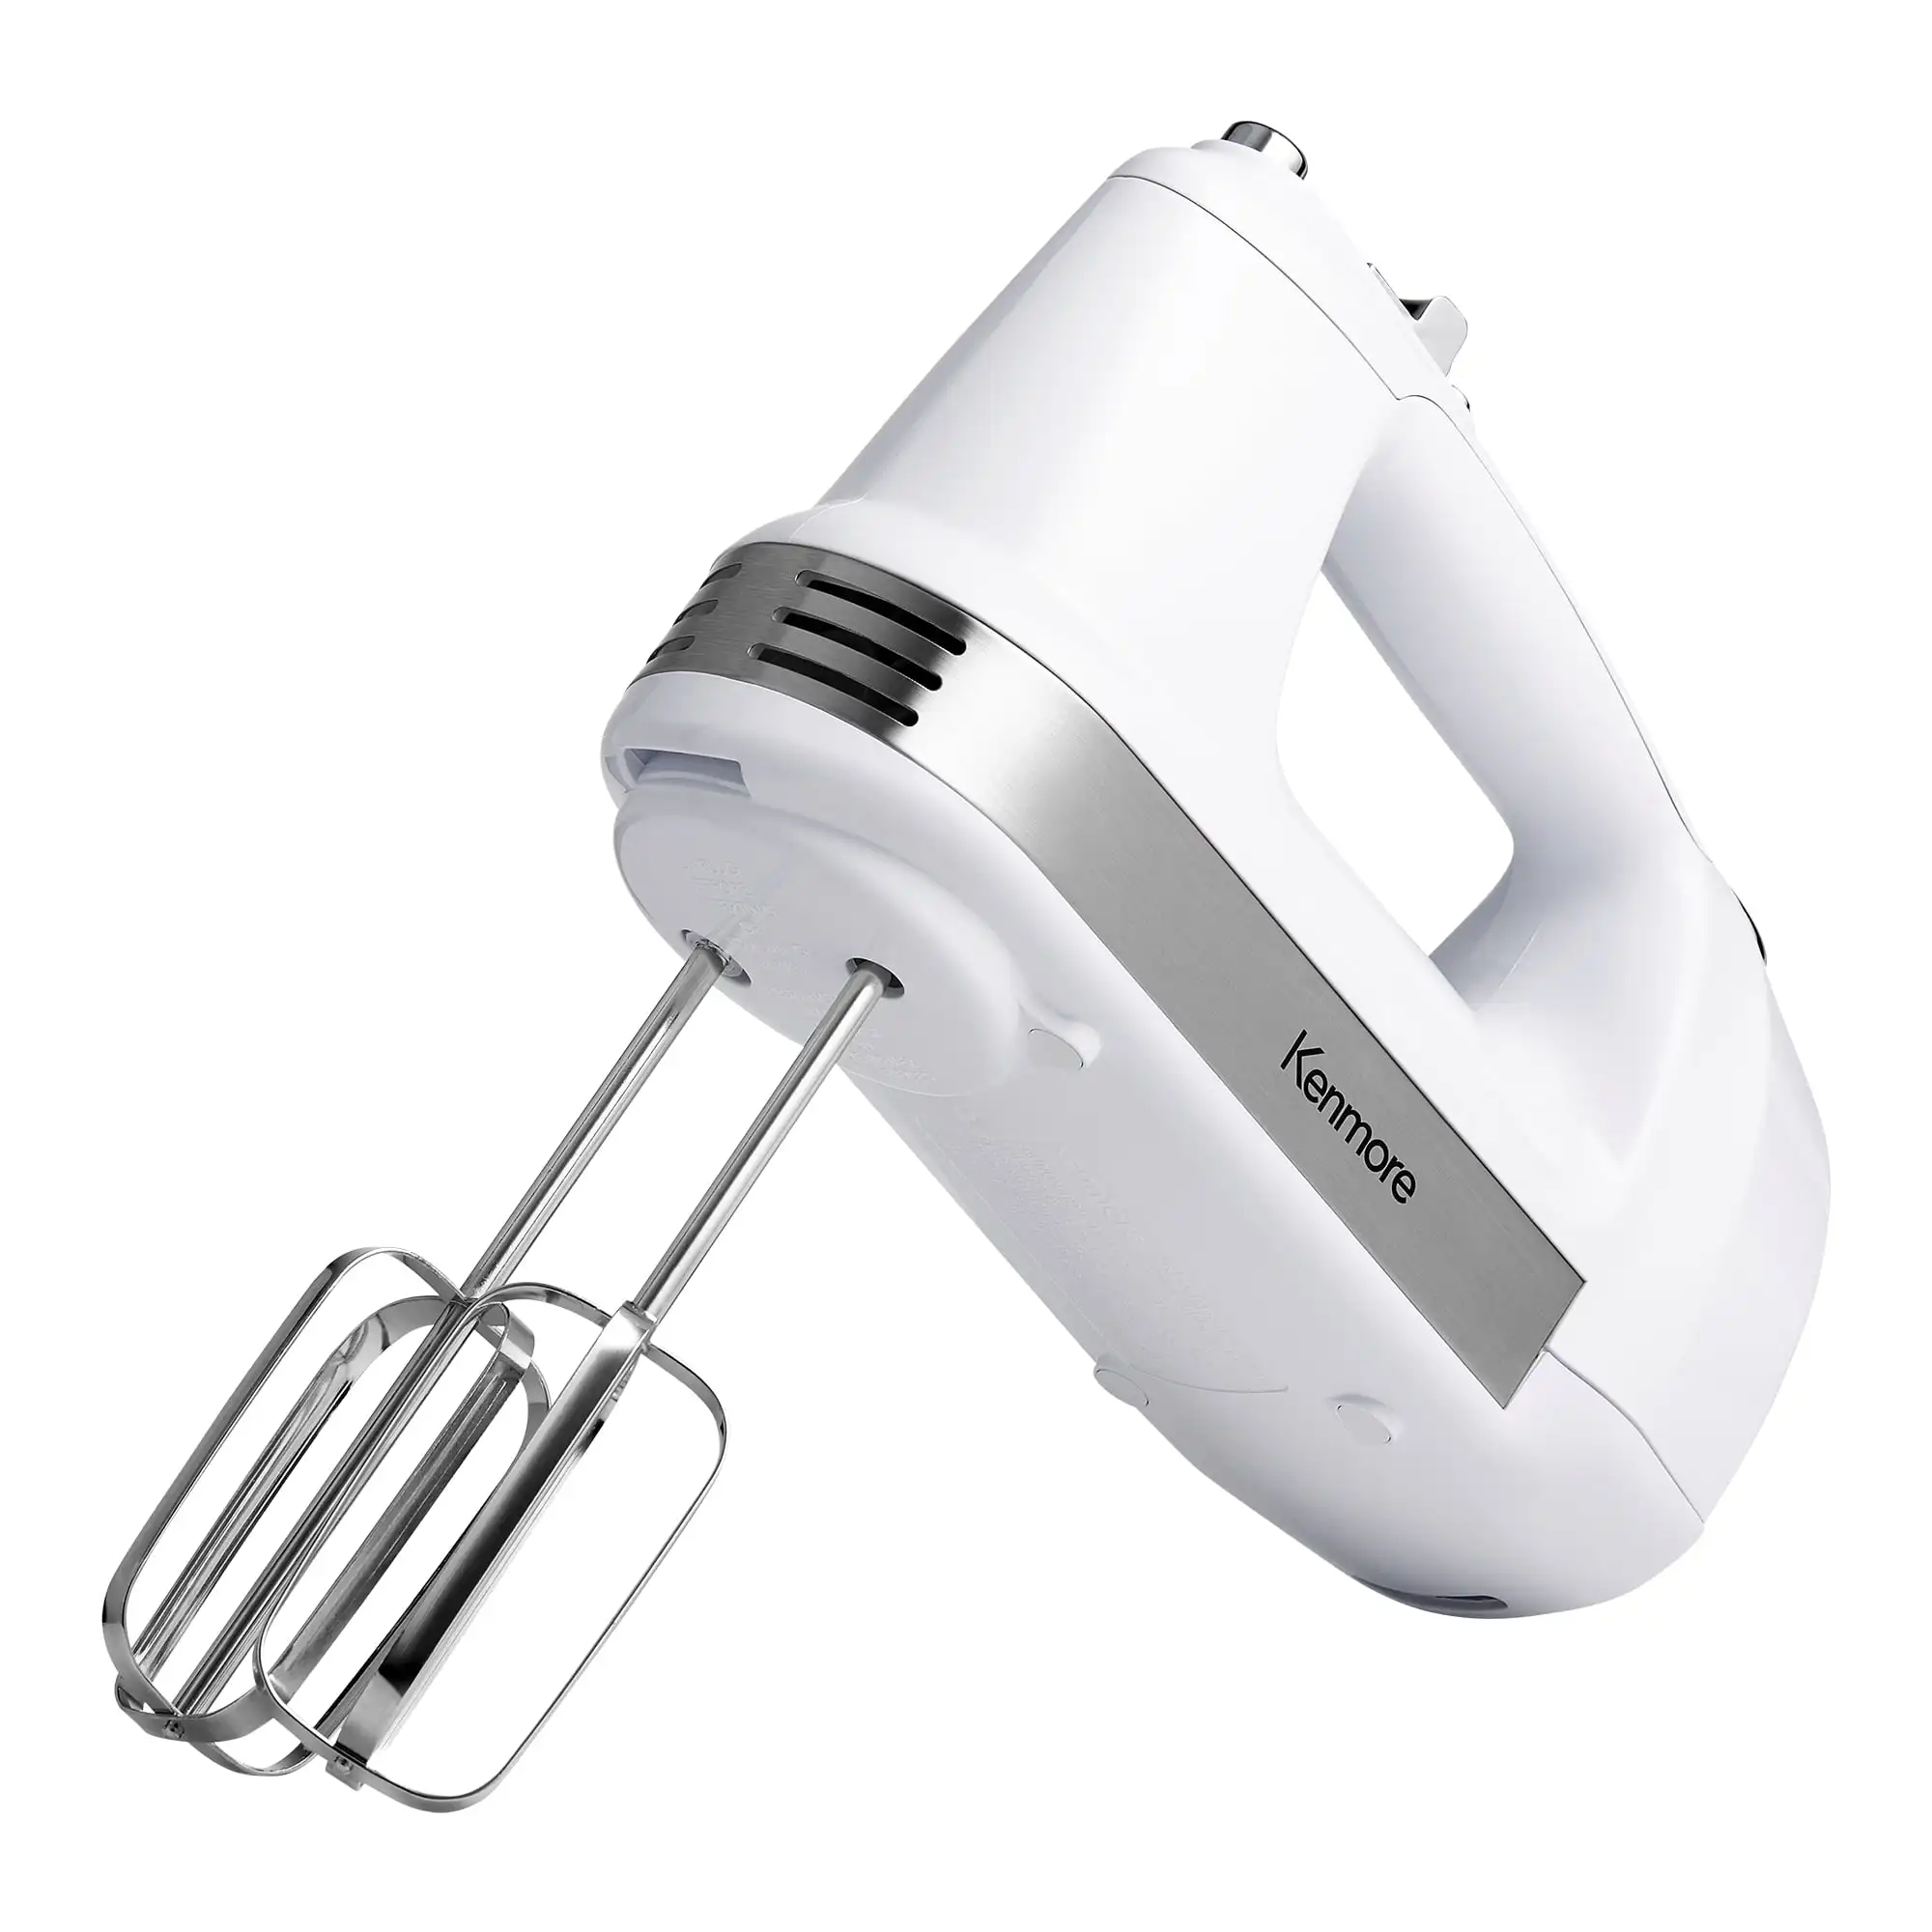 

5-Speed Hand Mixer / Beater / Blender 250W with Burst Control, White